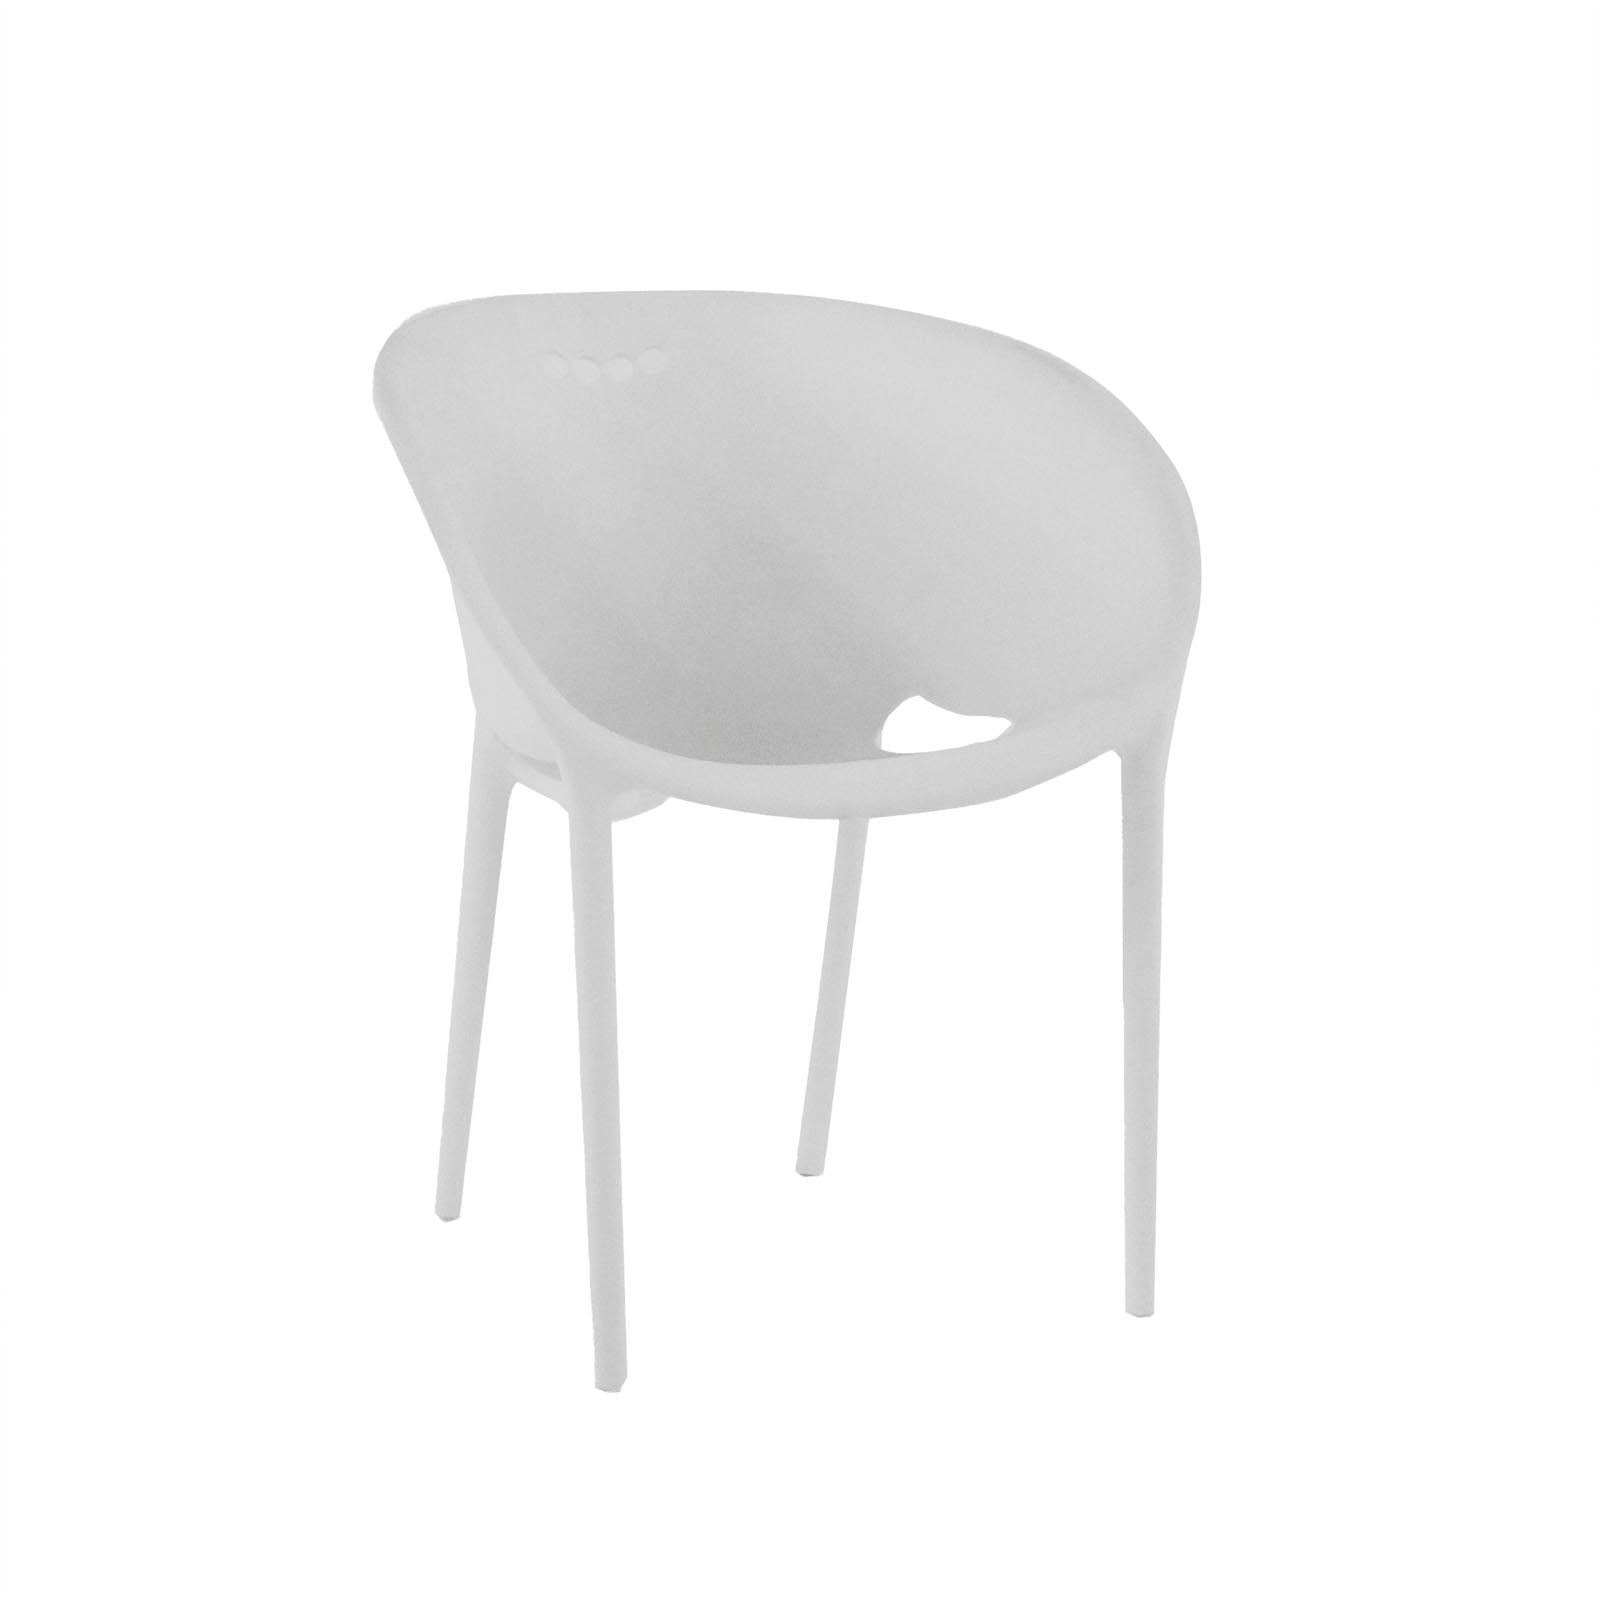 Design Warehouse - 124521 - Curve Cafe Dining Chair (White)  - White